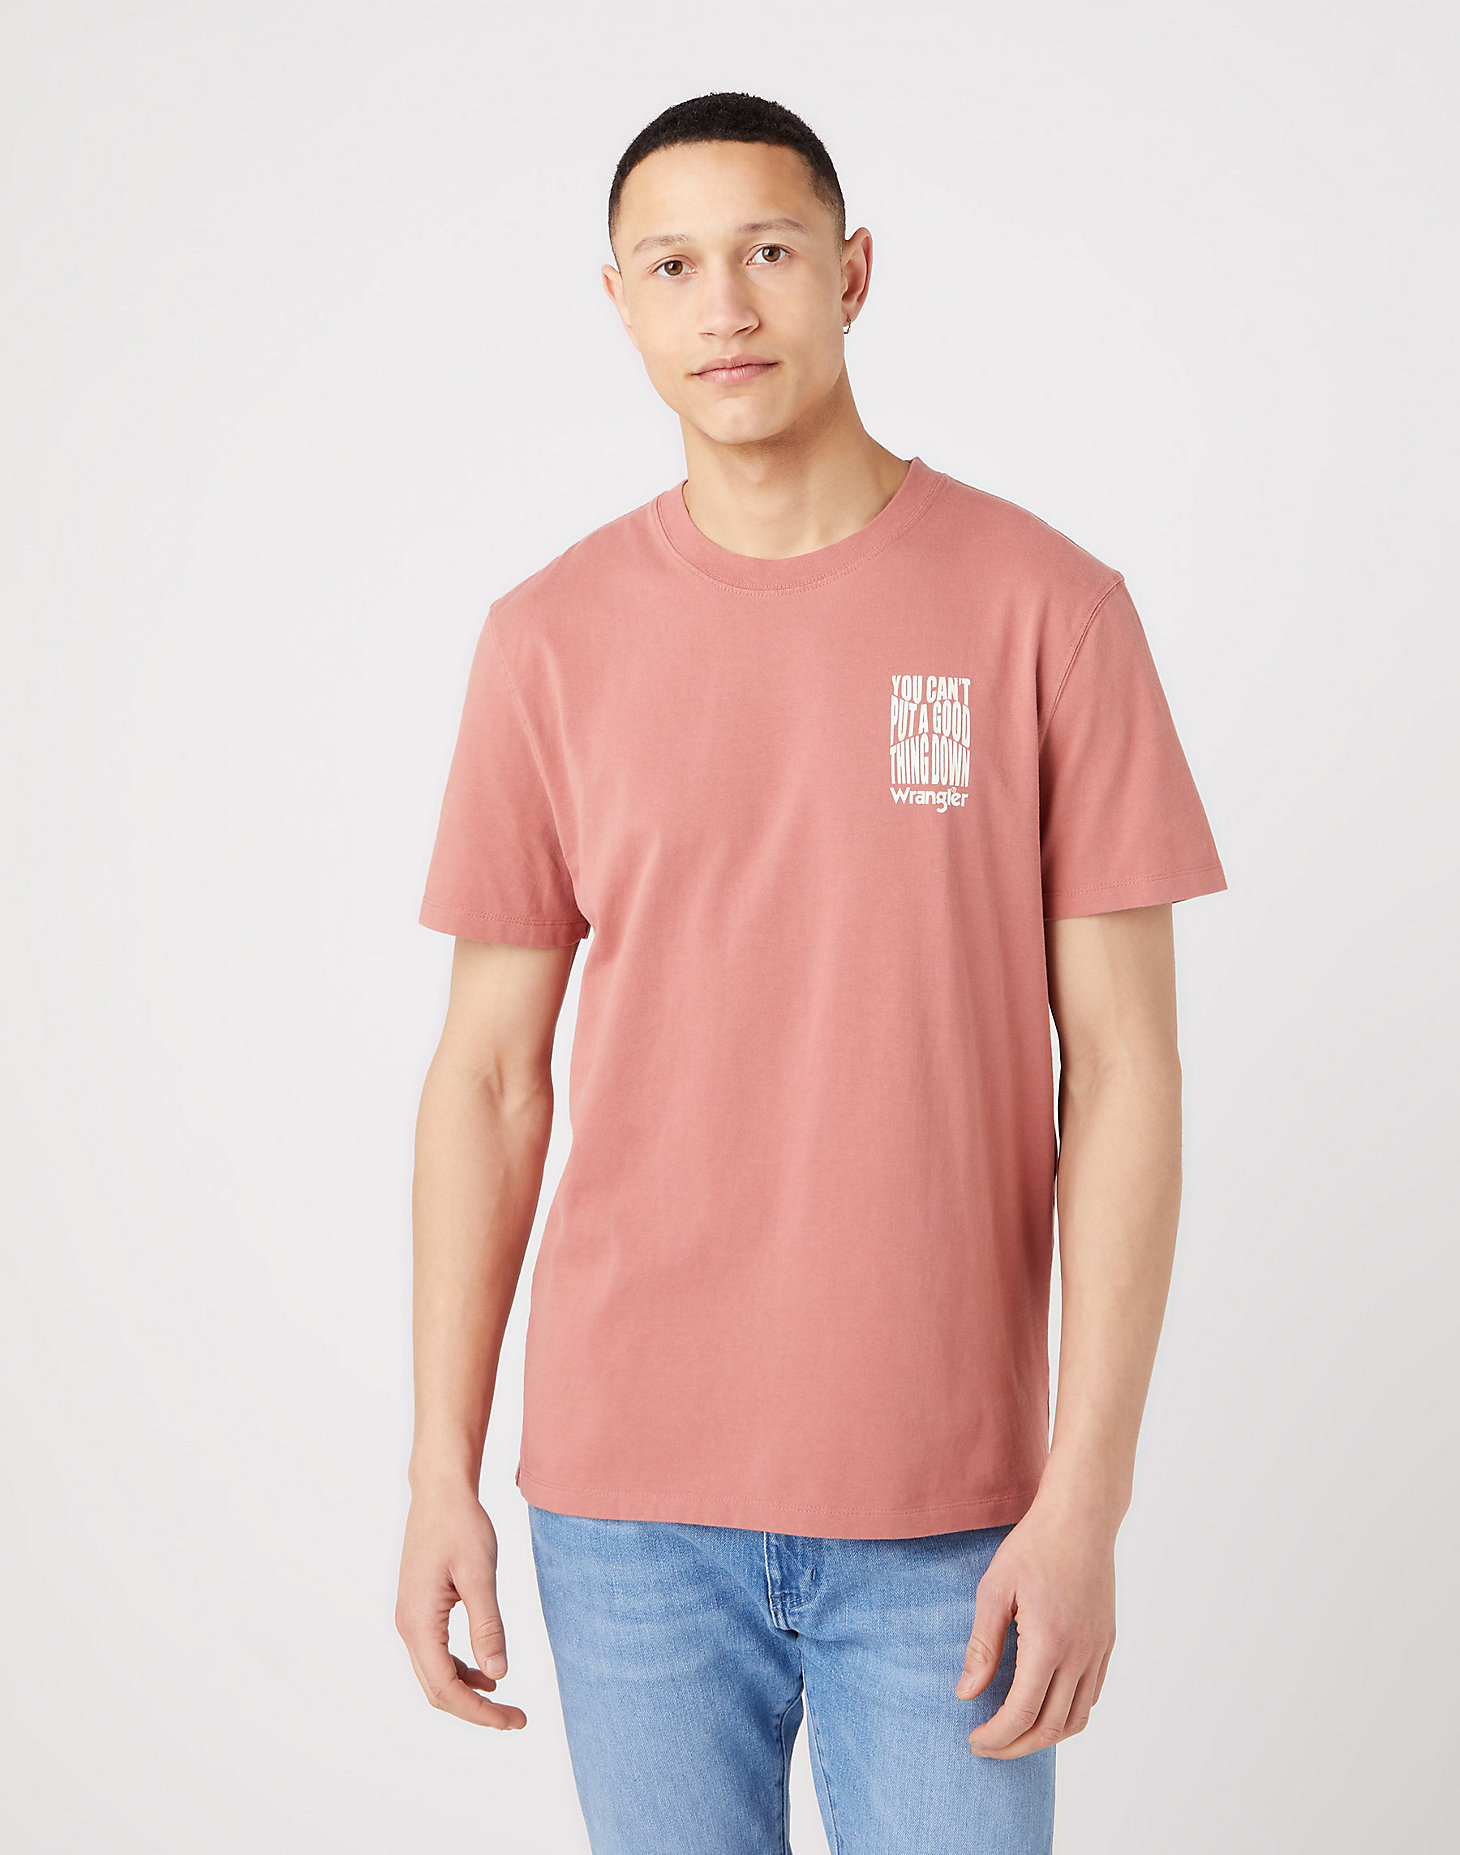 Graphic Tee in Withered Rose main view